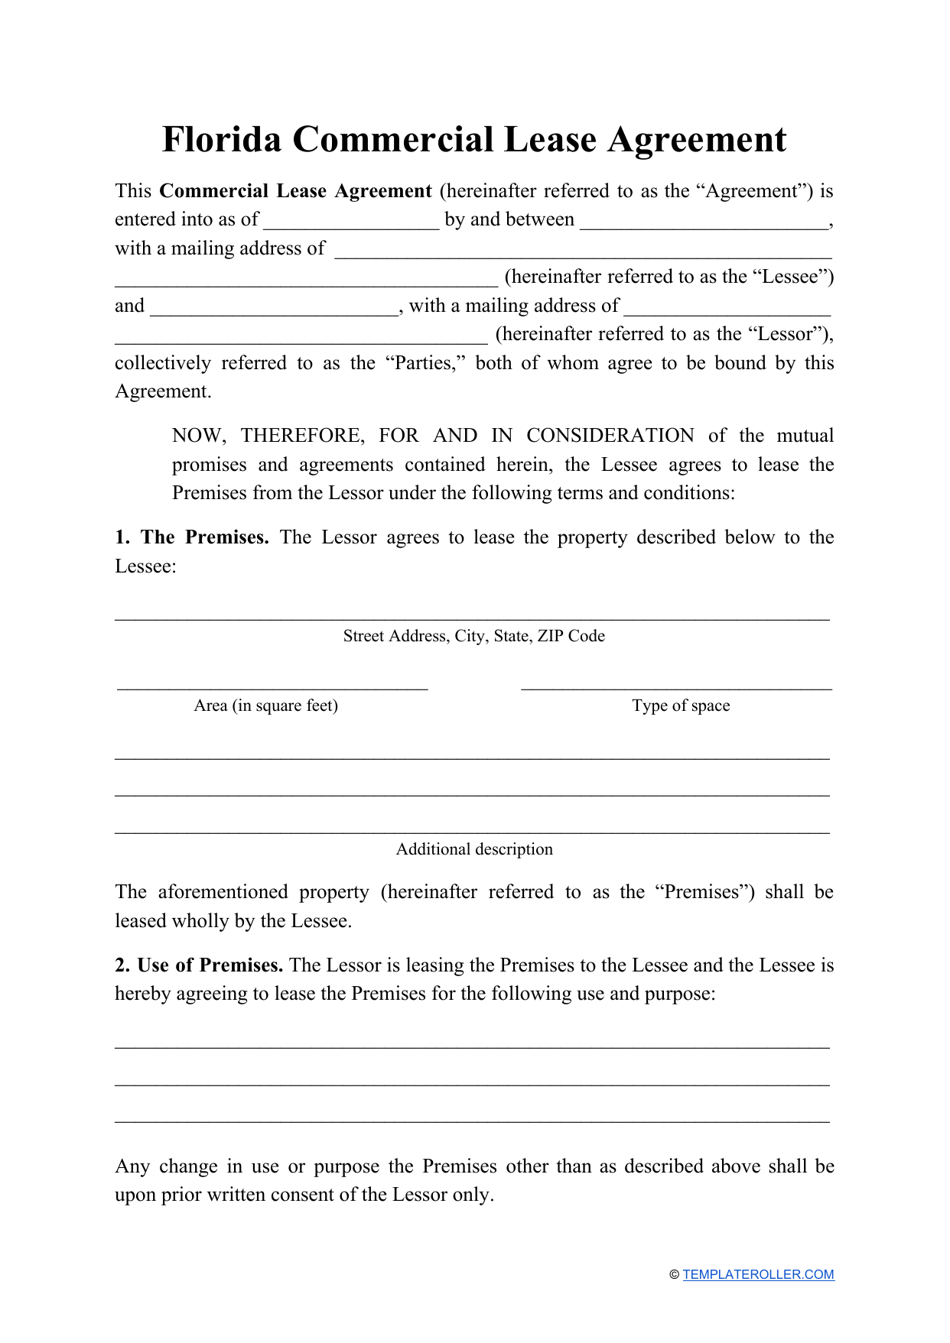 Florida Commercial Lease Agreement Template Fill Out, Sign Online and